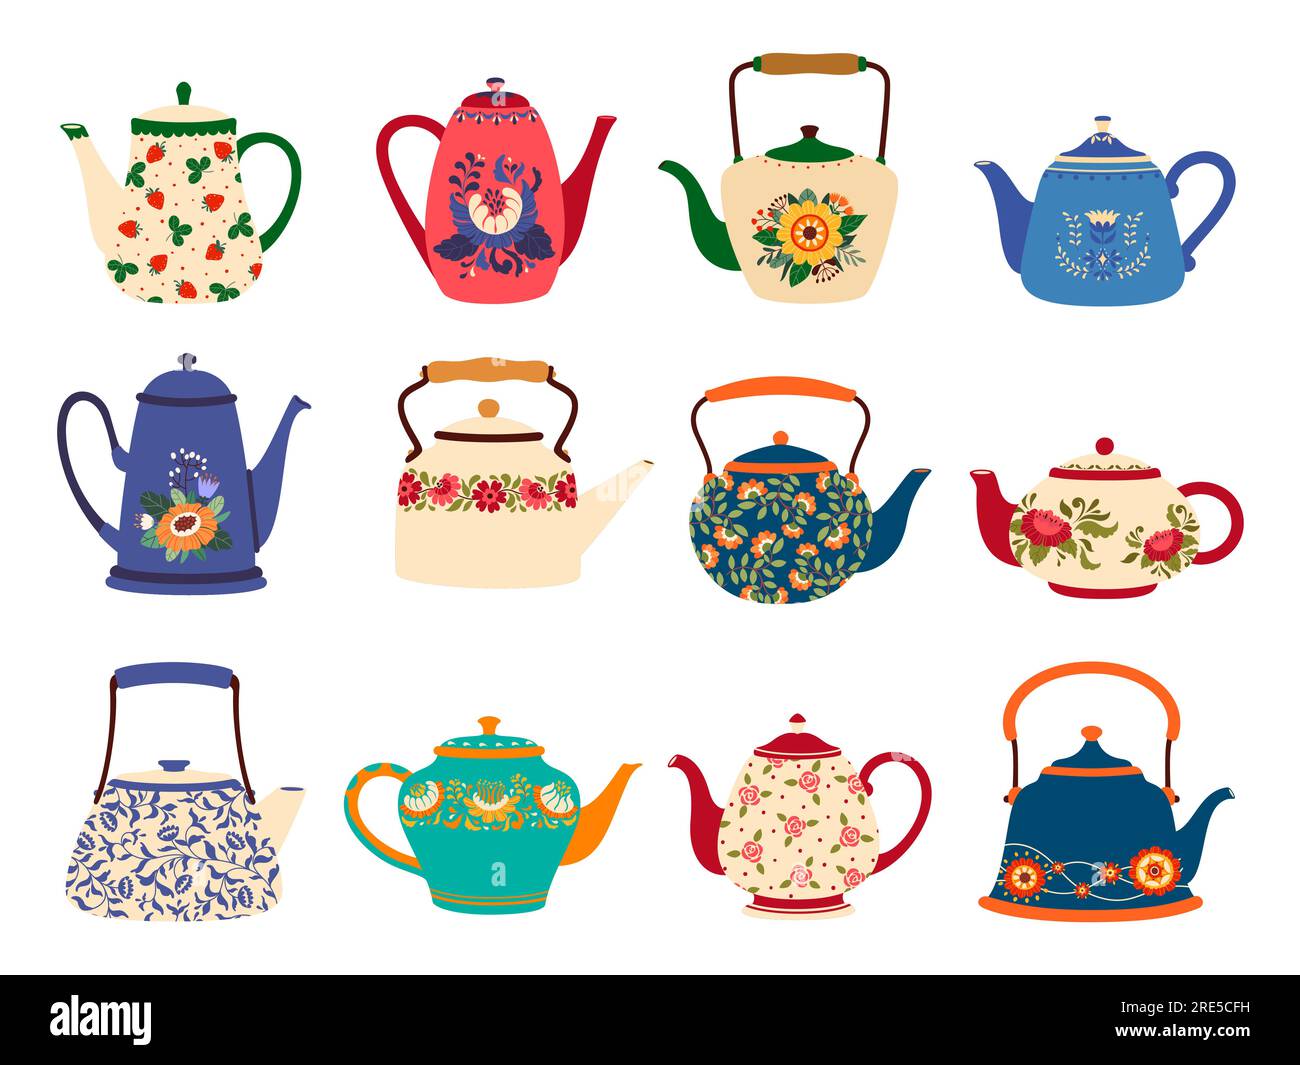 https://c8.alamy.com/comp/2RE5CFH/cartoon-ceramic-teapots-and-kettles-vintage-kitchen-crockery-or-pottery-tableware-isolated-vector-coffee-or-tea-pots-decorated-with-floral-ornaments-of-flower-blossoms-berries-and-green-leaves-2RE5CFH.jpg